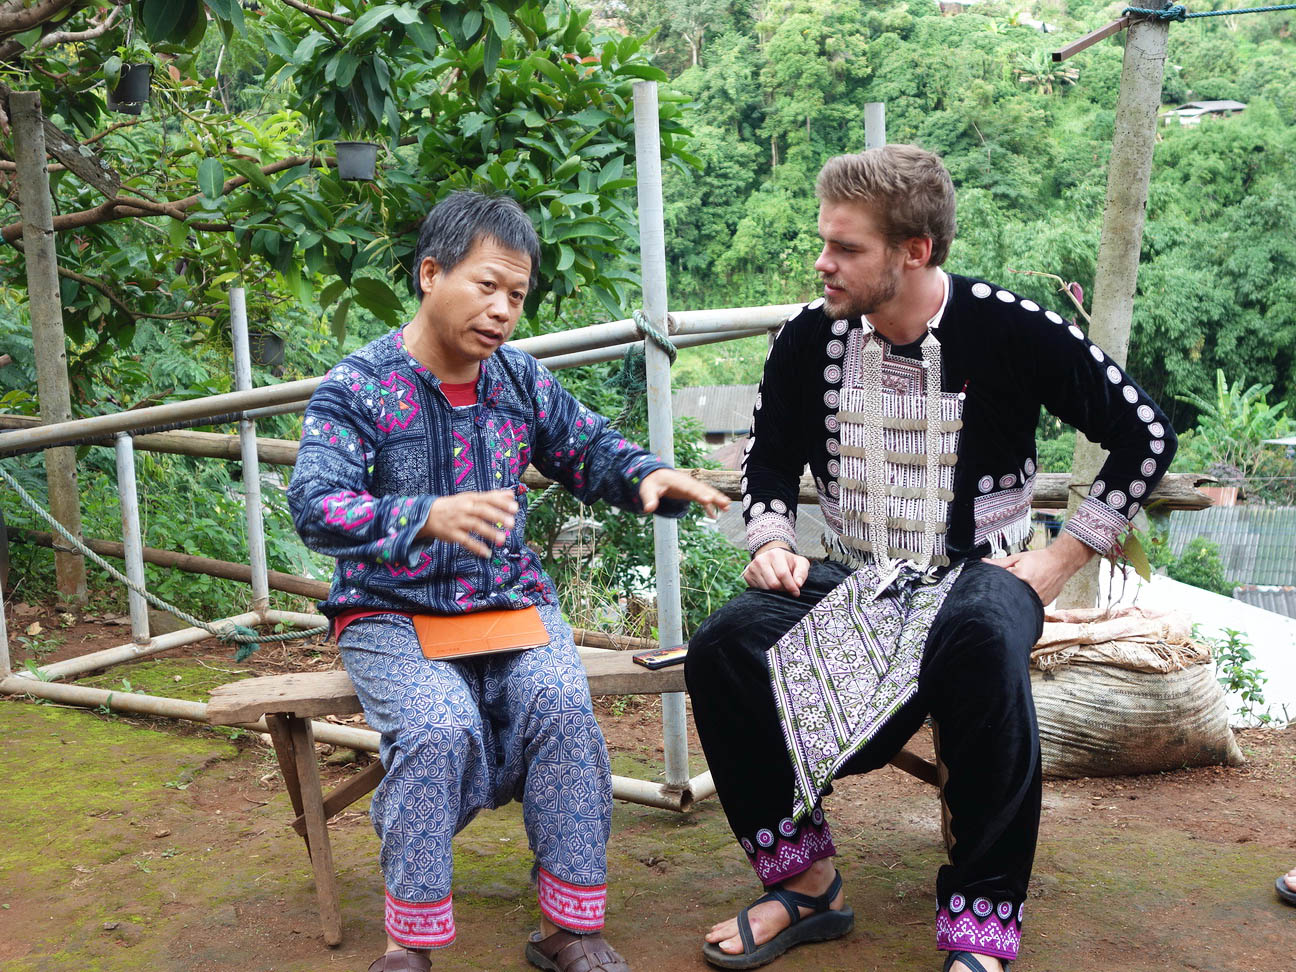 A student chatting with a Hmong man in the Doi Pui Hmong Village in Thailand.